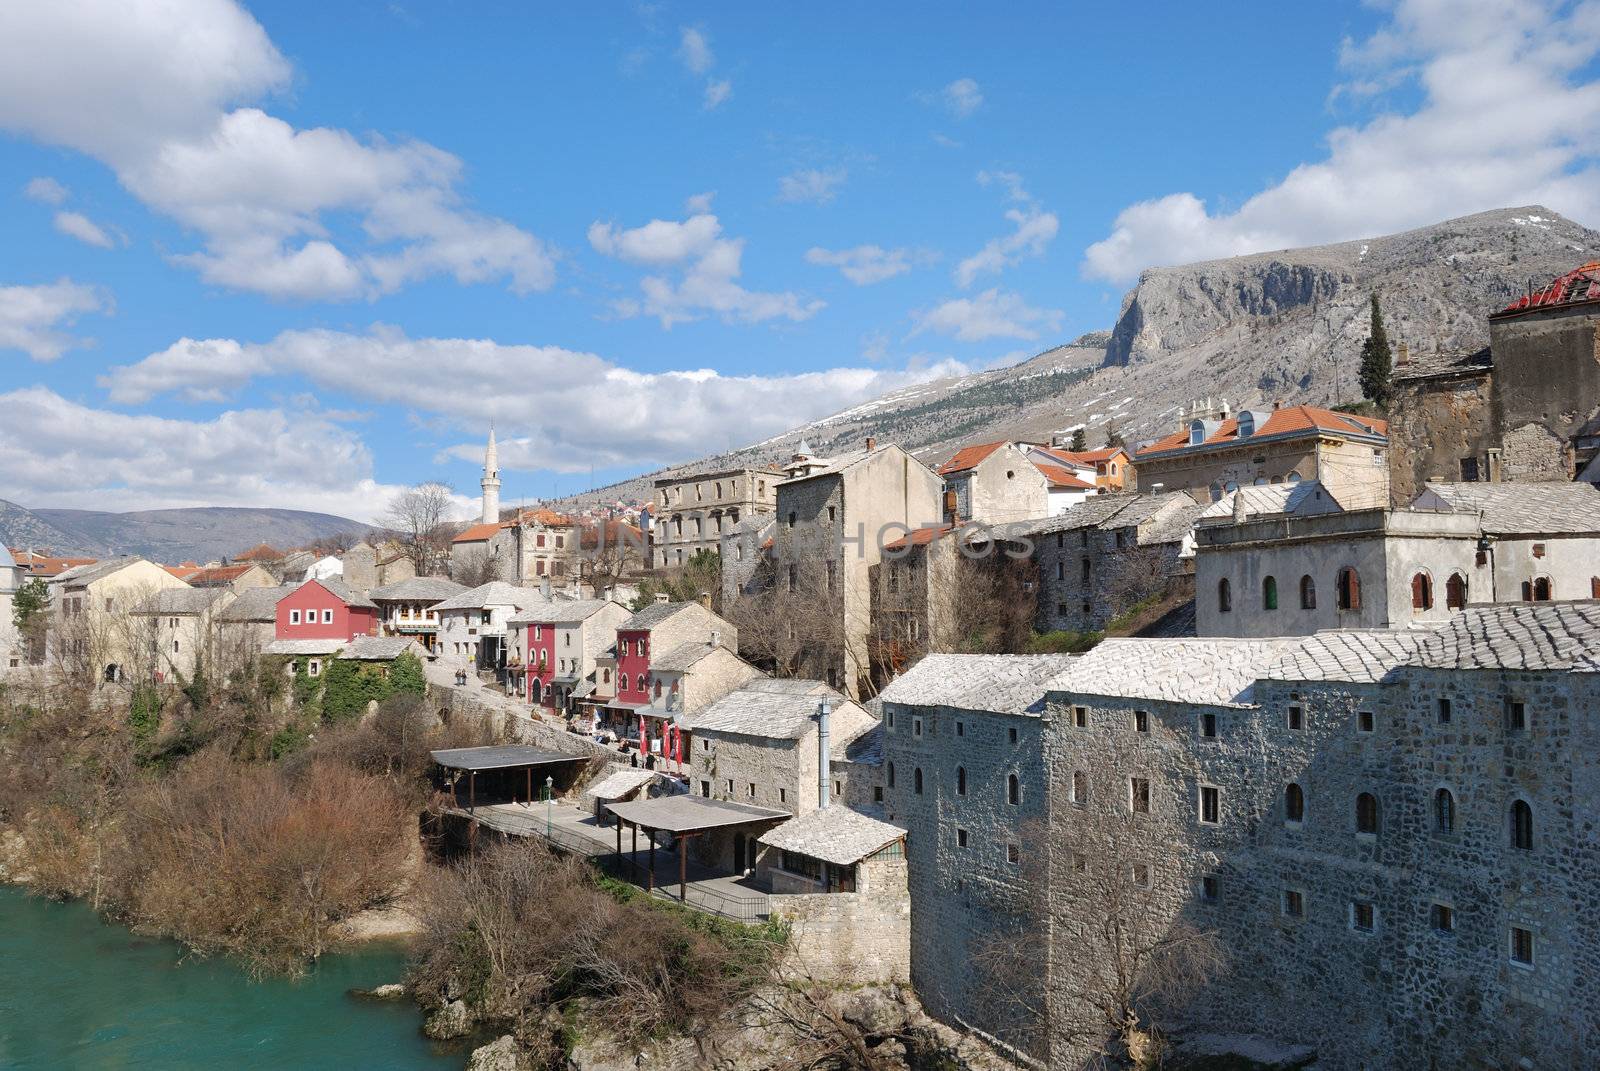 Mostar Old Town on a sunny winter day.